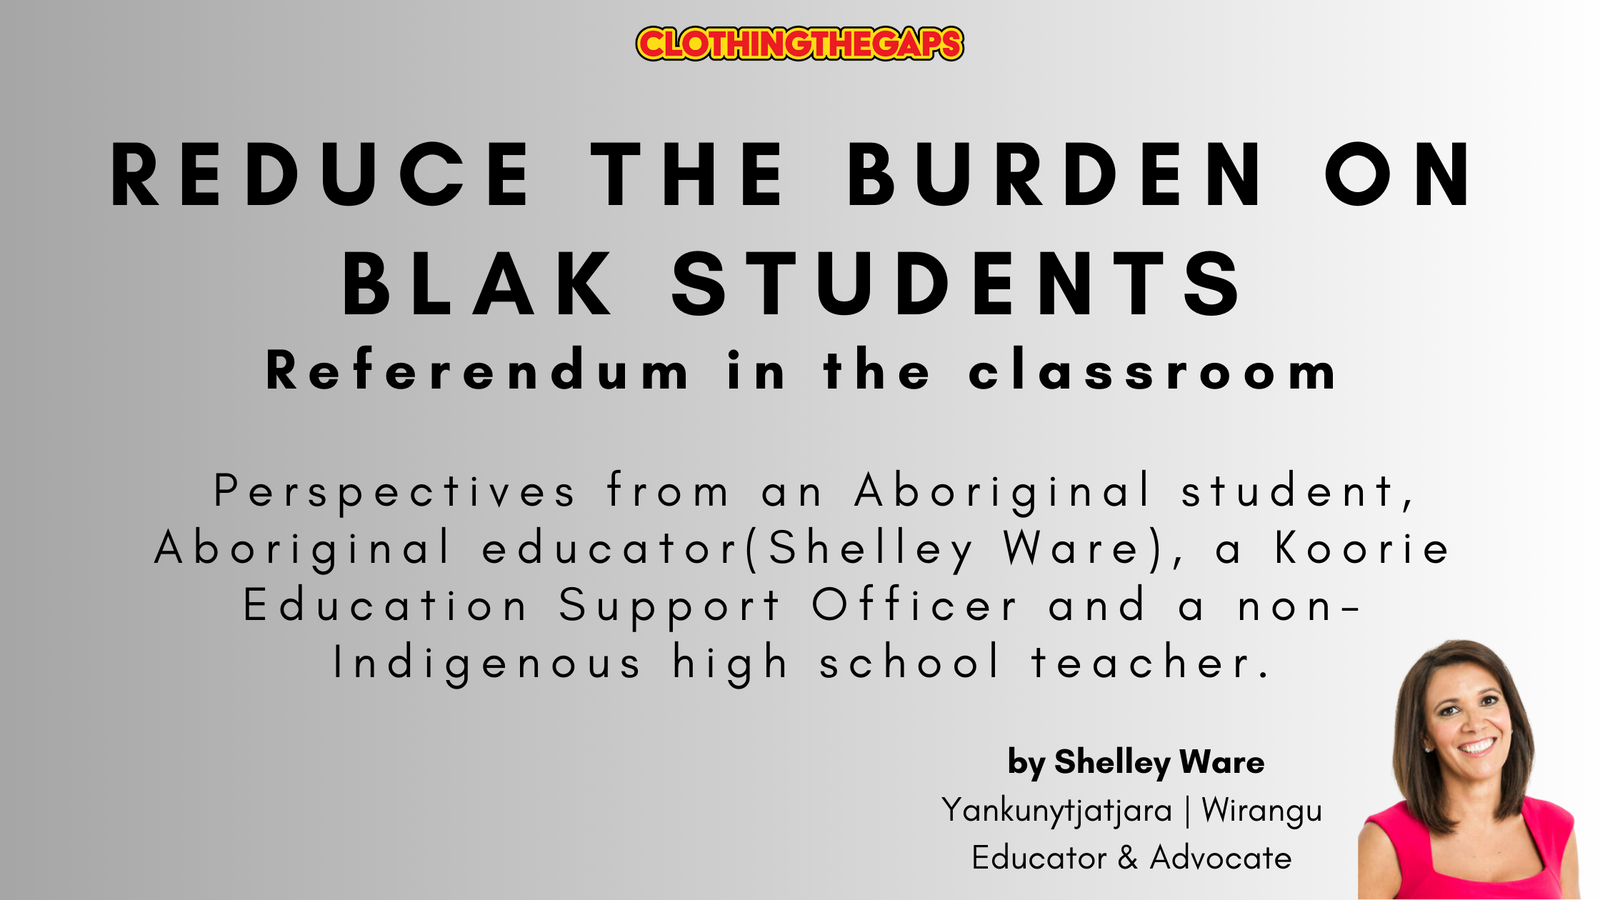 The Burden on Blak students - talking about the Referendum in the Classroom